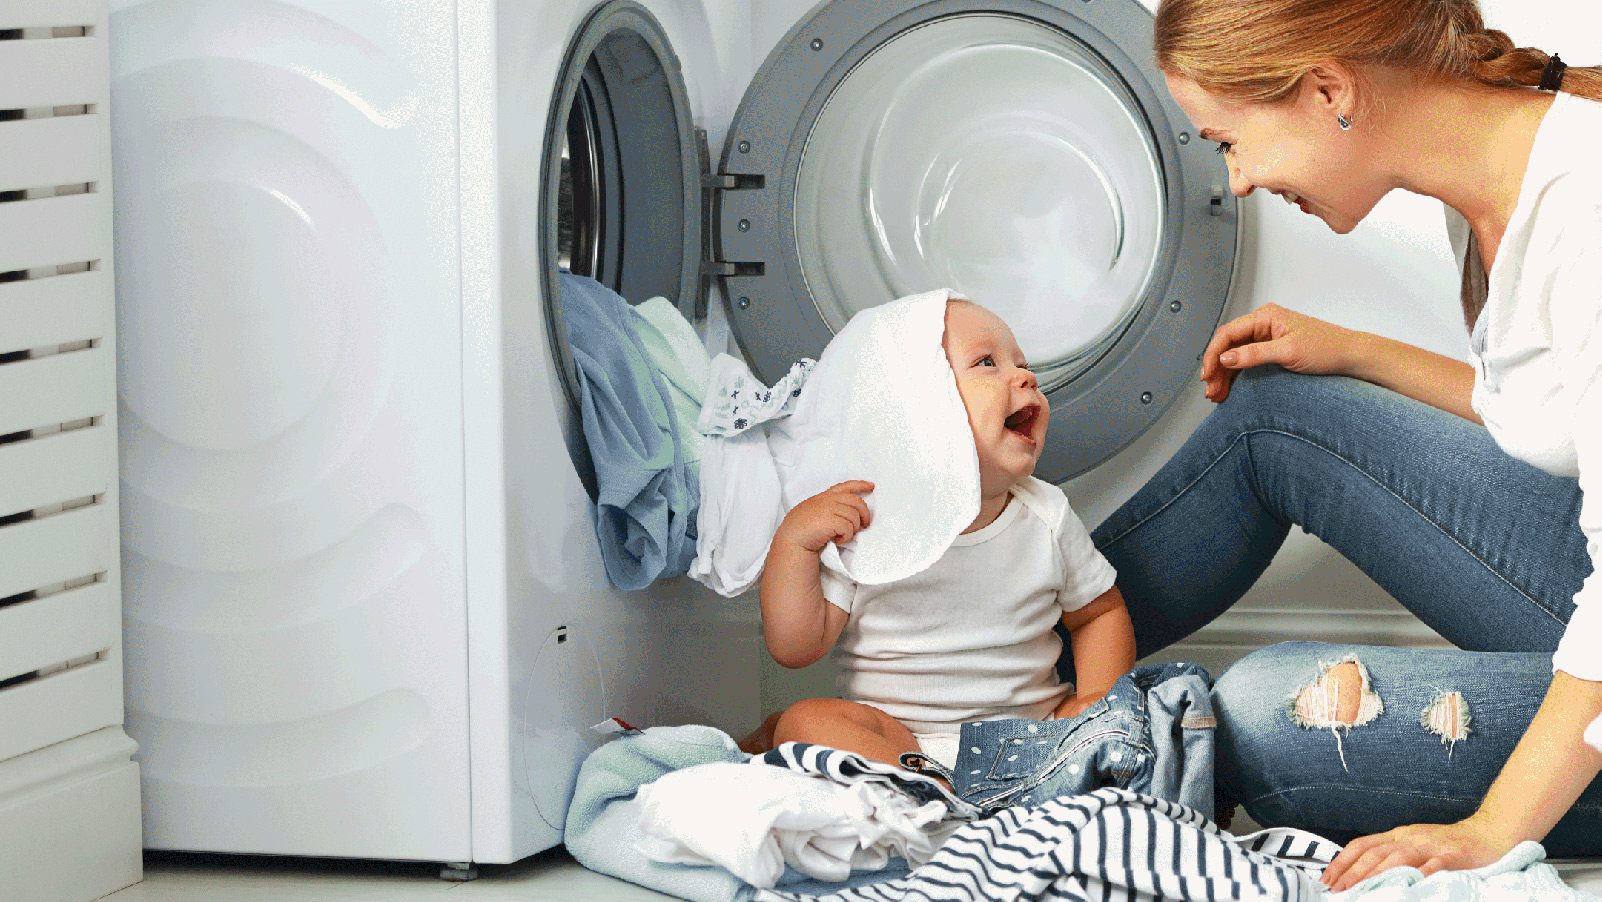 Mother and her baby smiling and playing in the laundry room.